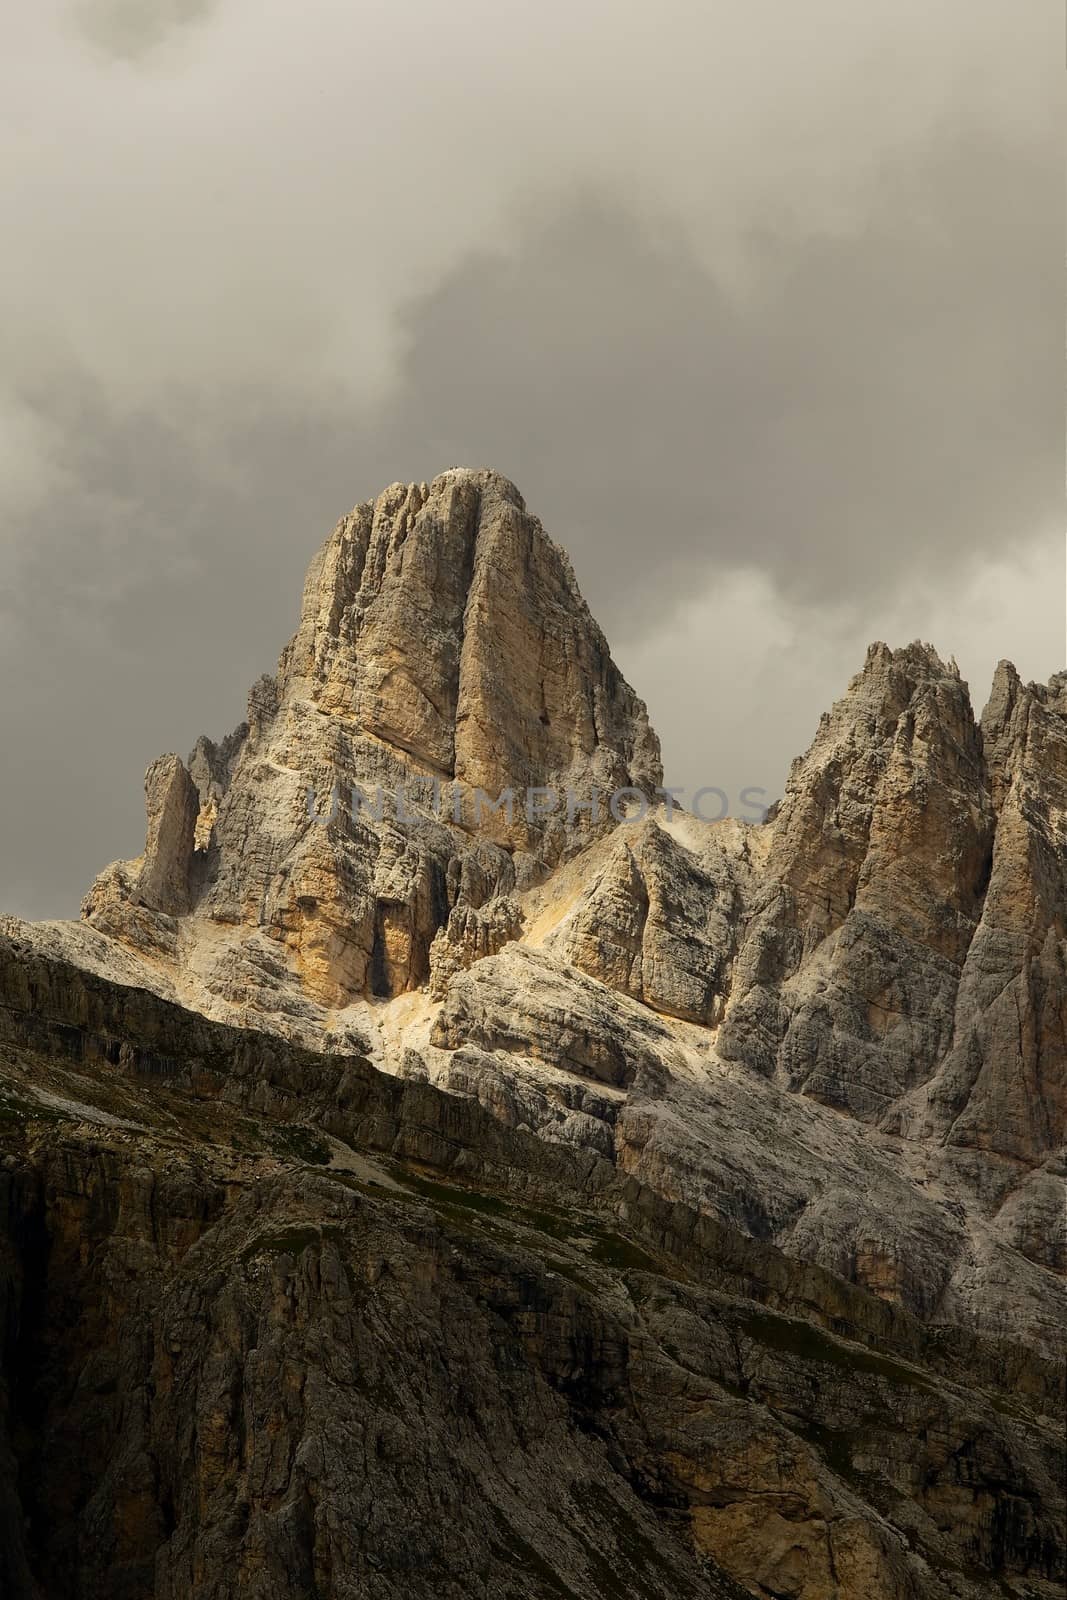 High mountain cliffs in the Dolomites